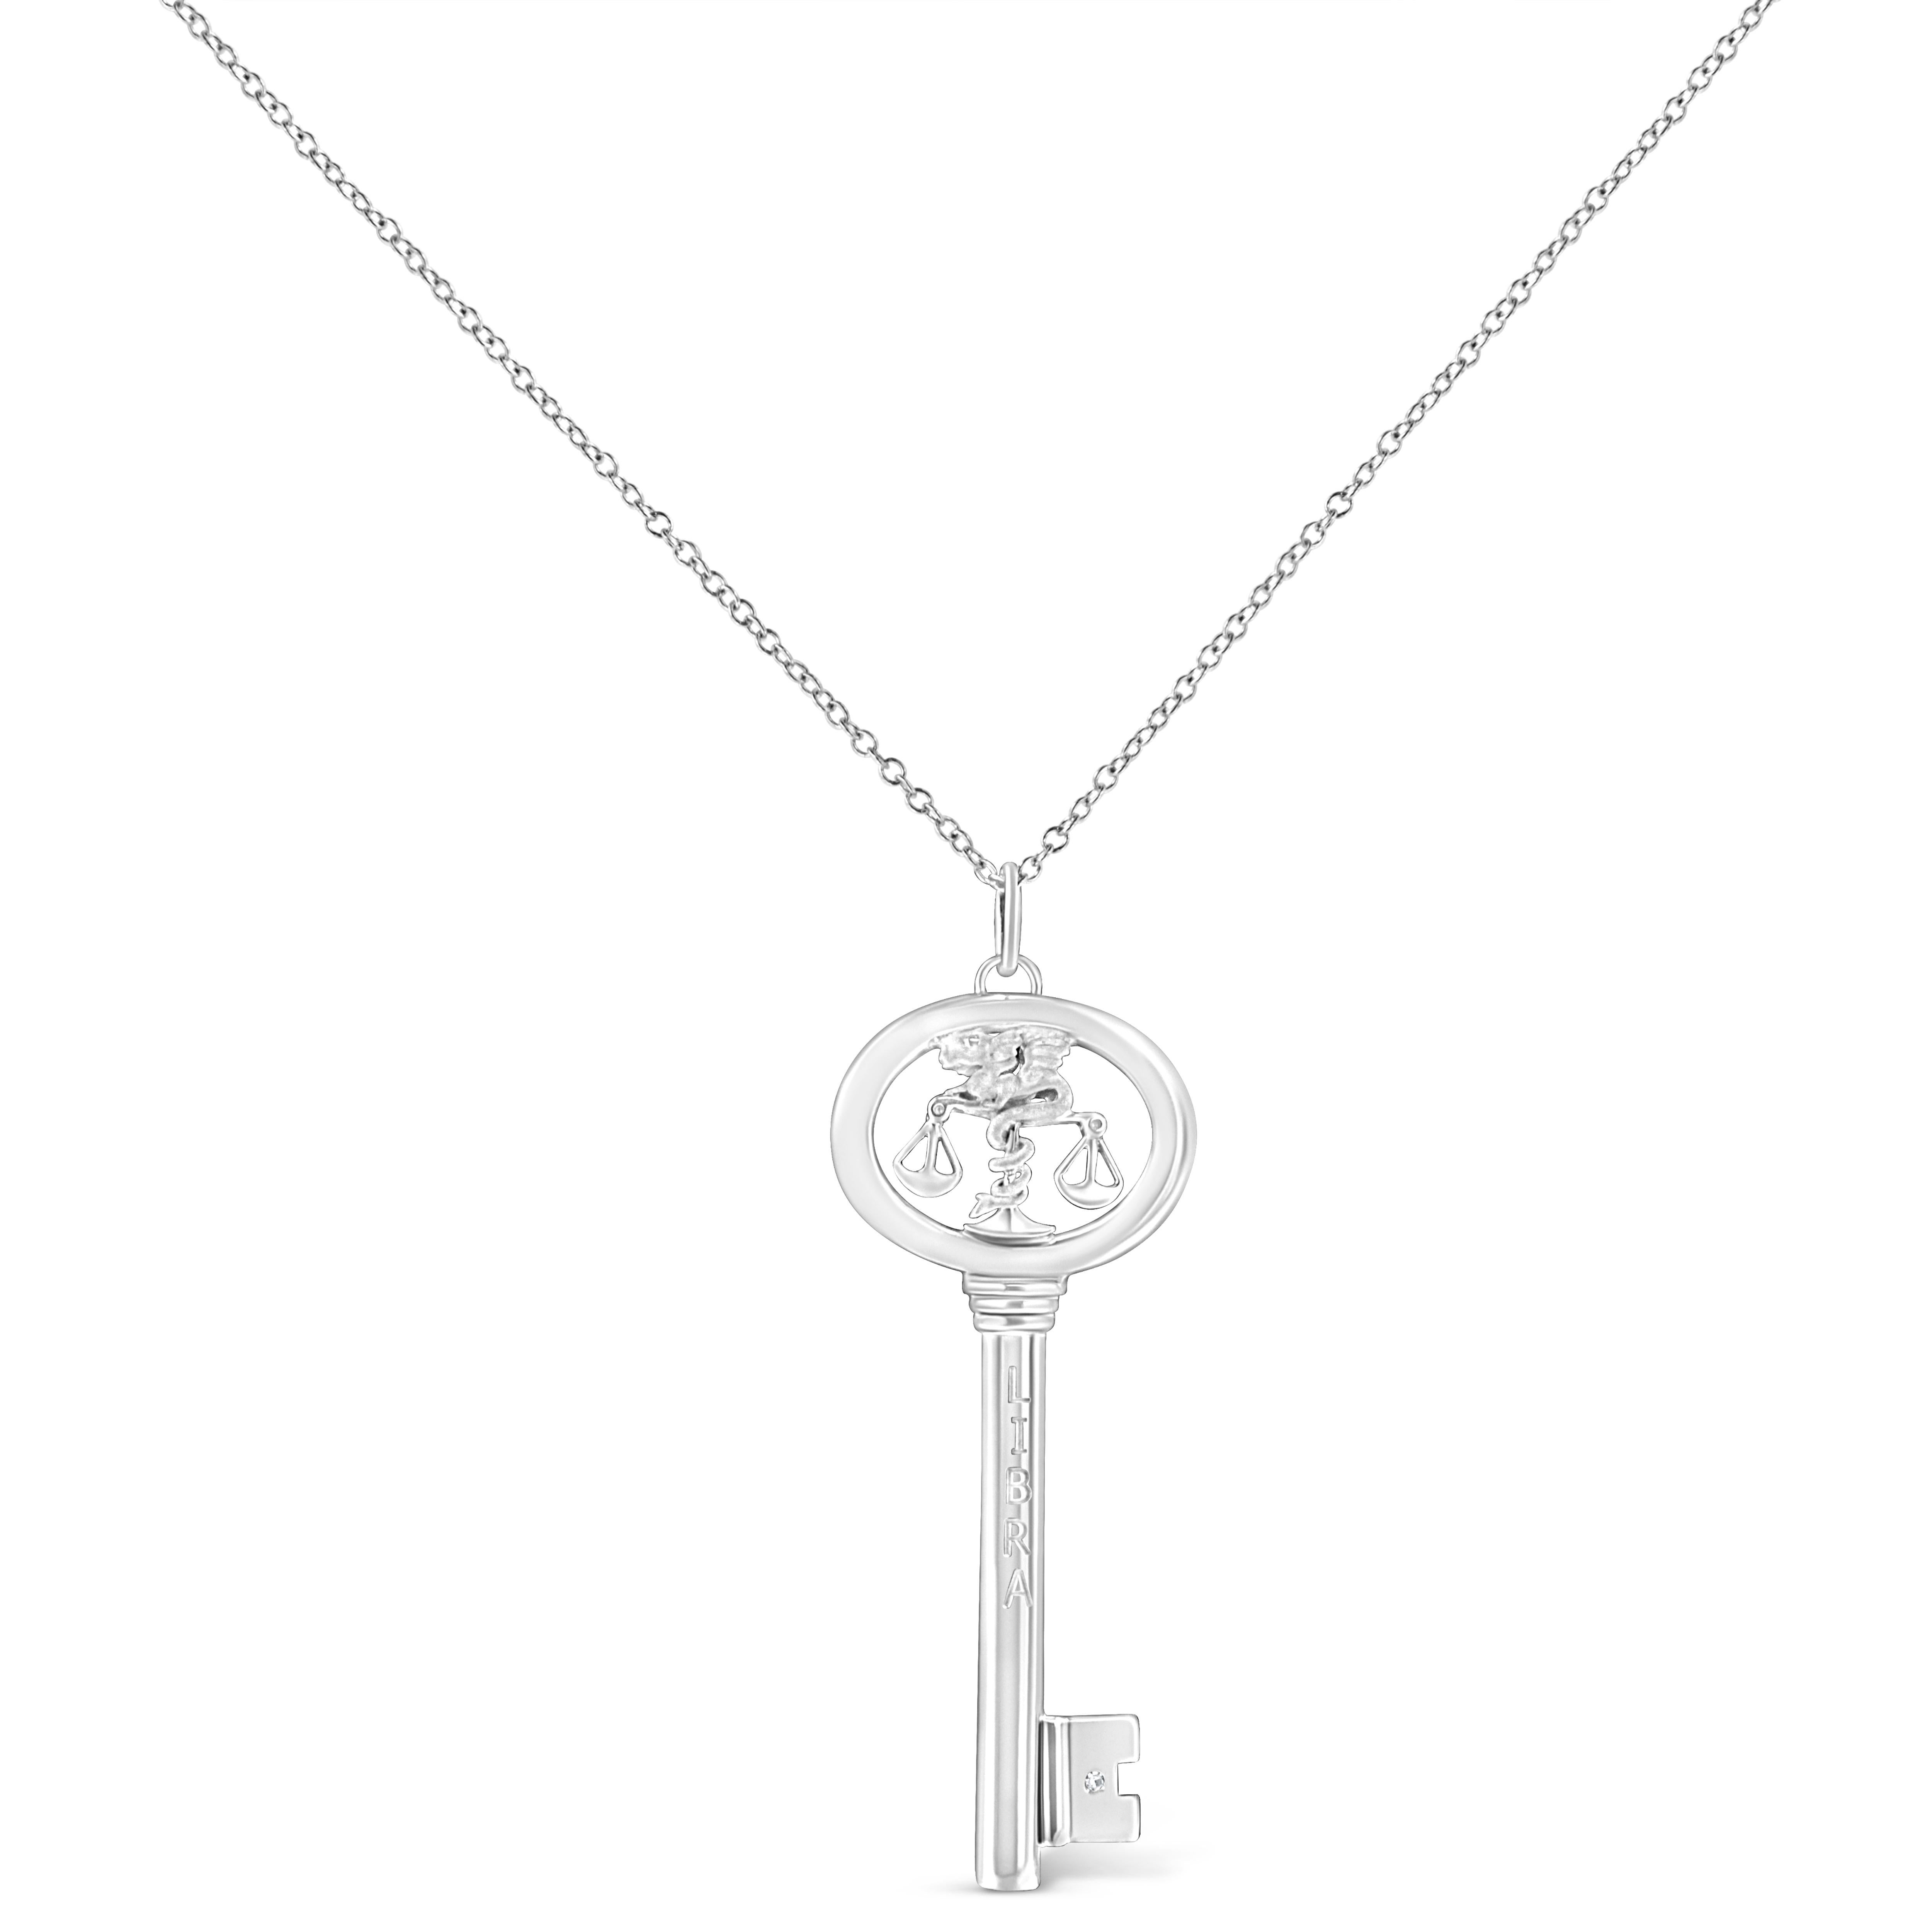 It's as if the stars aligned to create this stunning .925 Sterling Silver necklace flaunting a Libra zodiac pendant accented by a glimmering bezel set natural diamond. Brilliant beacons of optimism and hope, our Zodiac Keys are radiant symbols of a